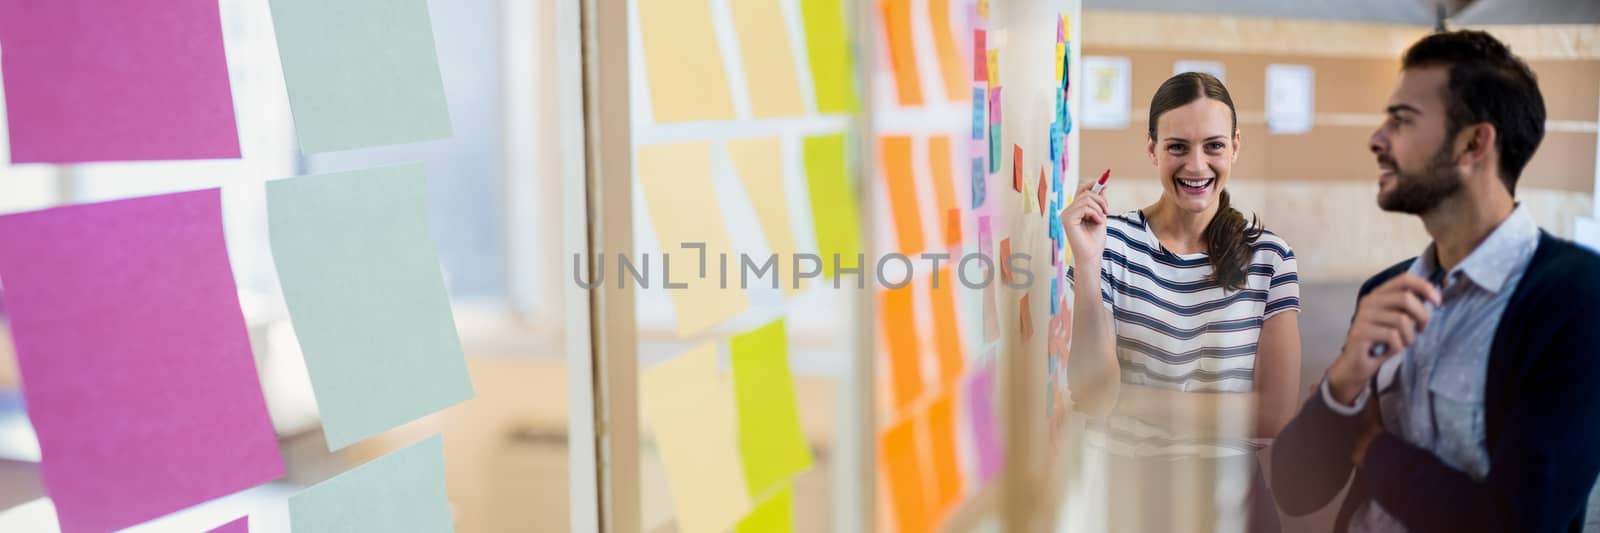 Digital composite of Business people having a meeting with sticky notes transition effect